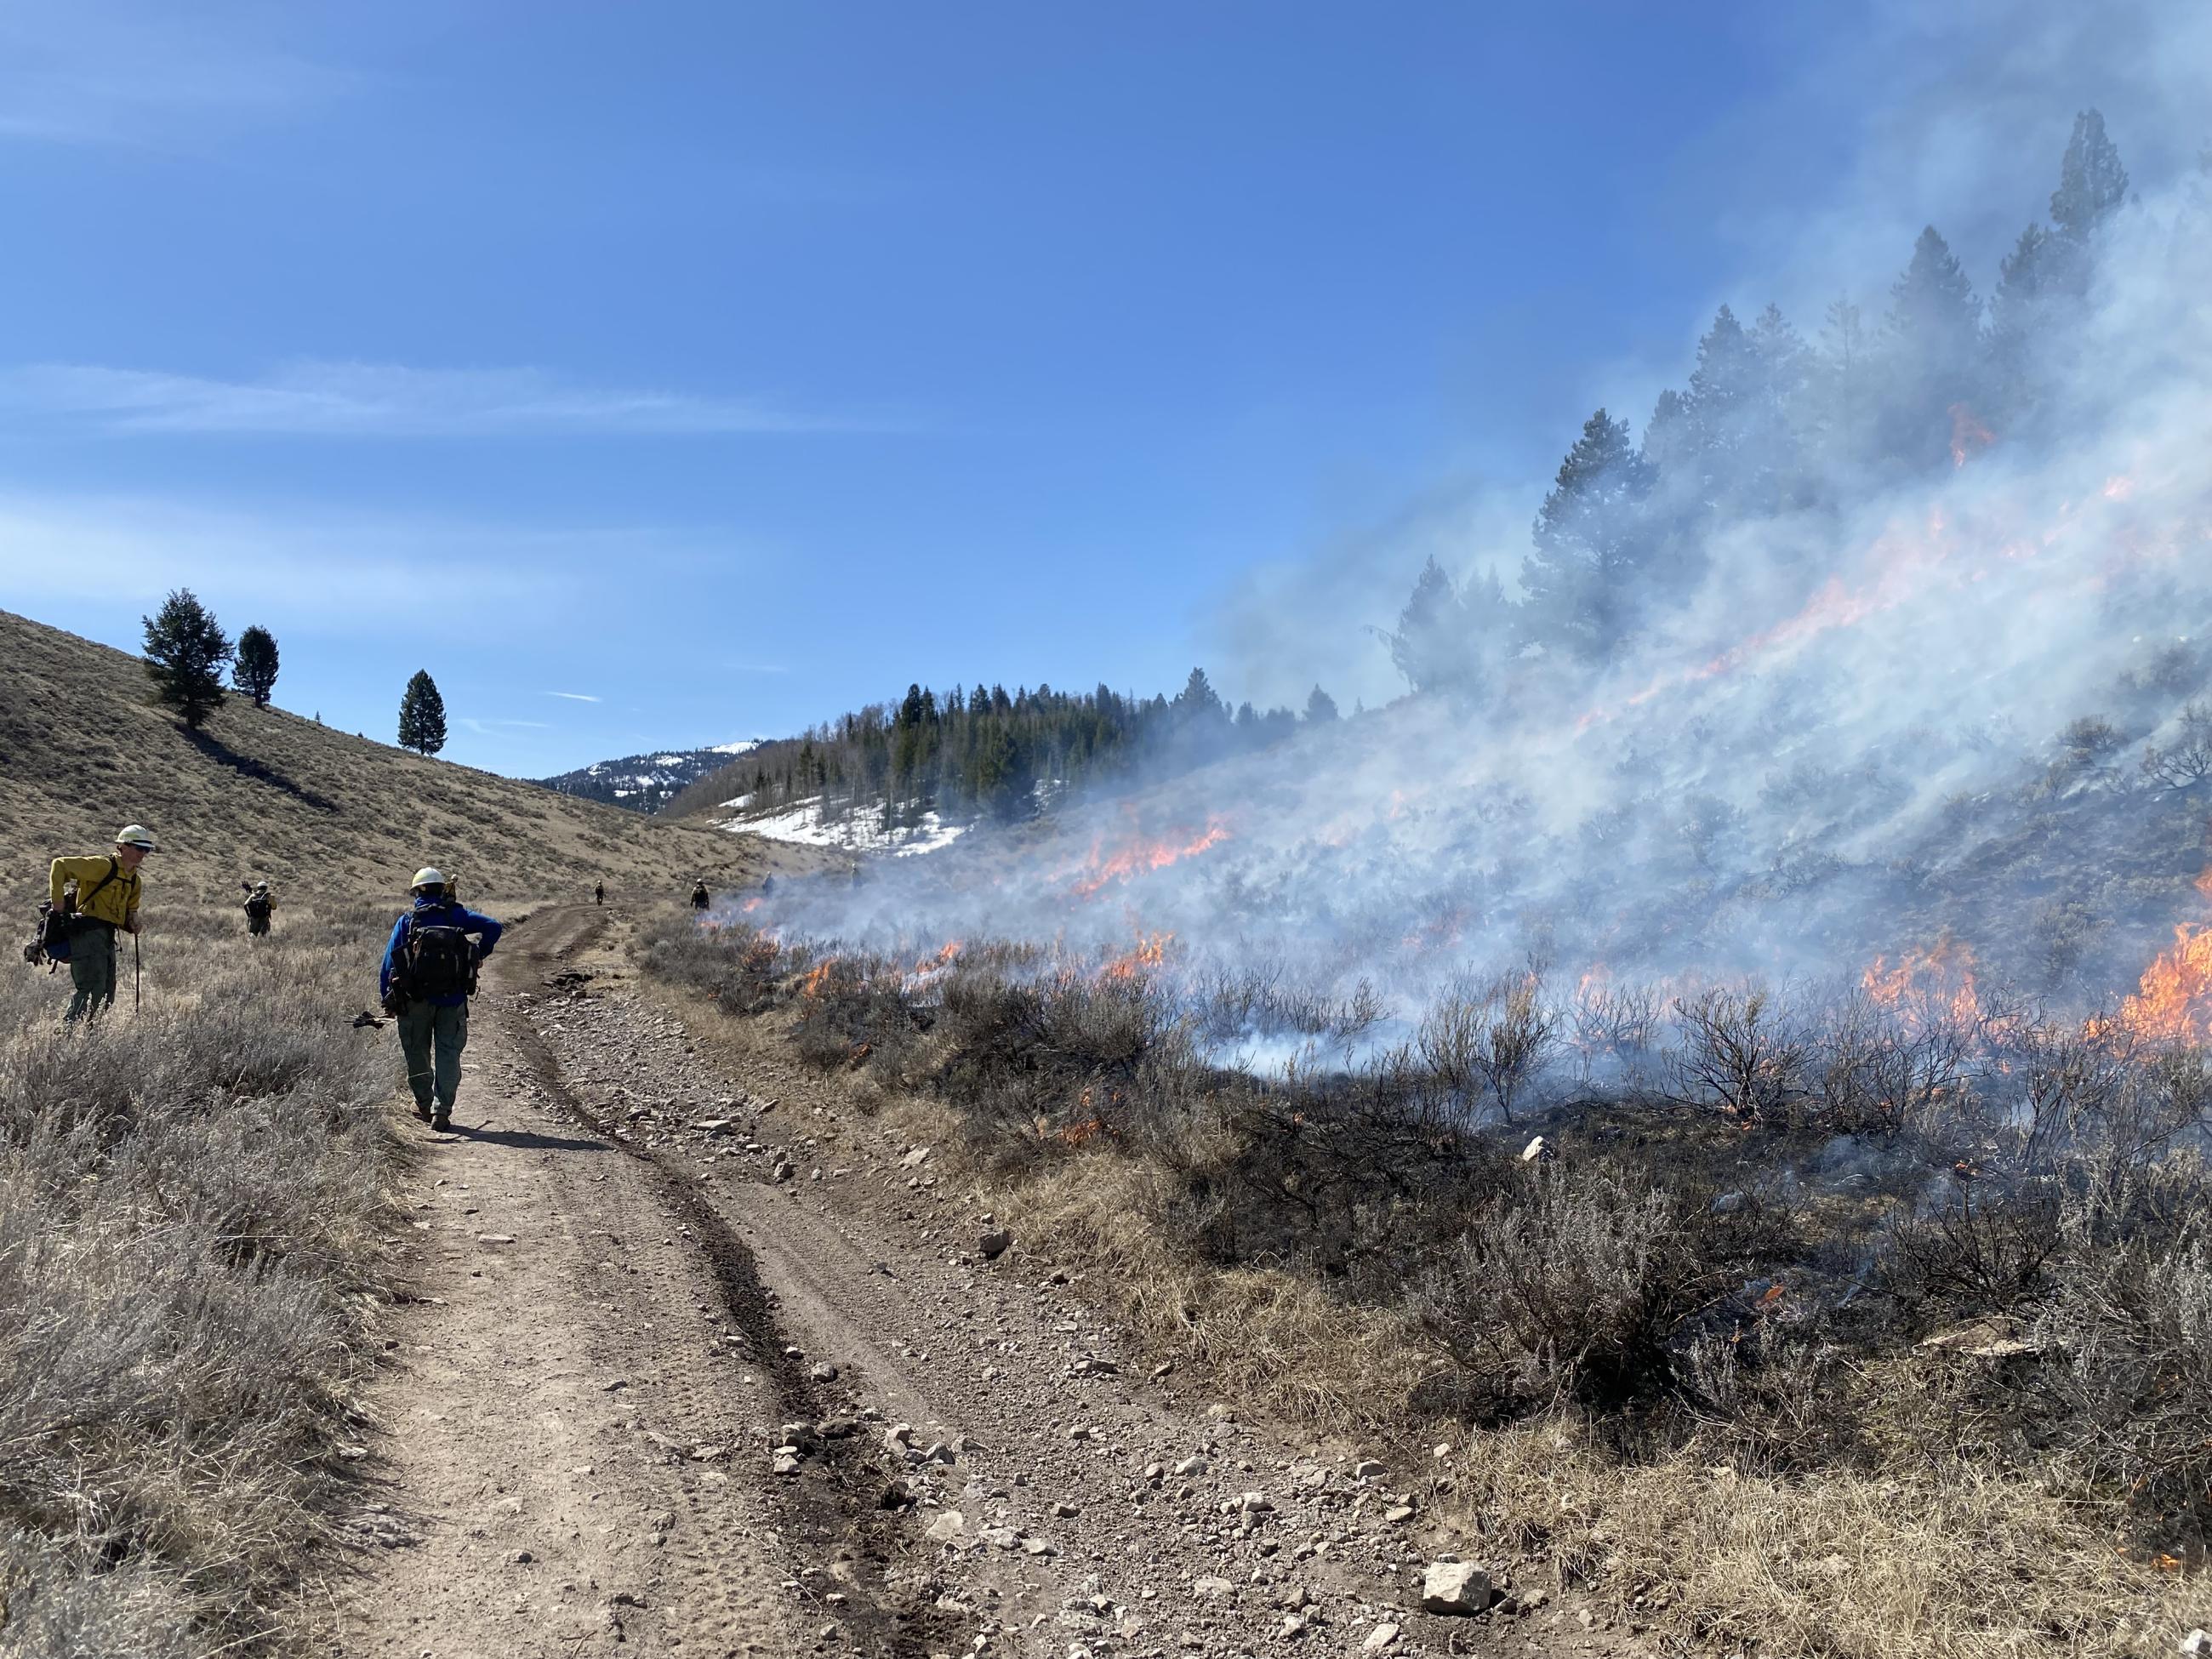 Firefighters along road with flames and ground fire on other side; ignition for a prescribed fire operation.